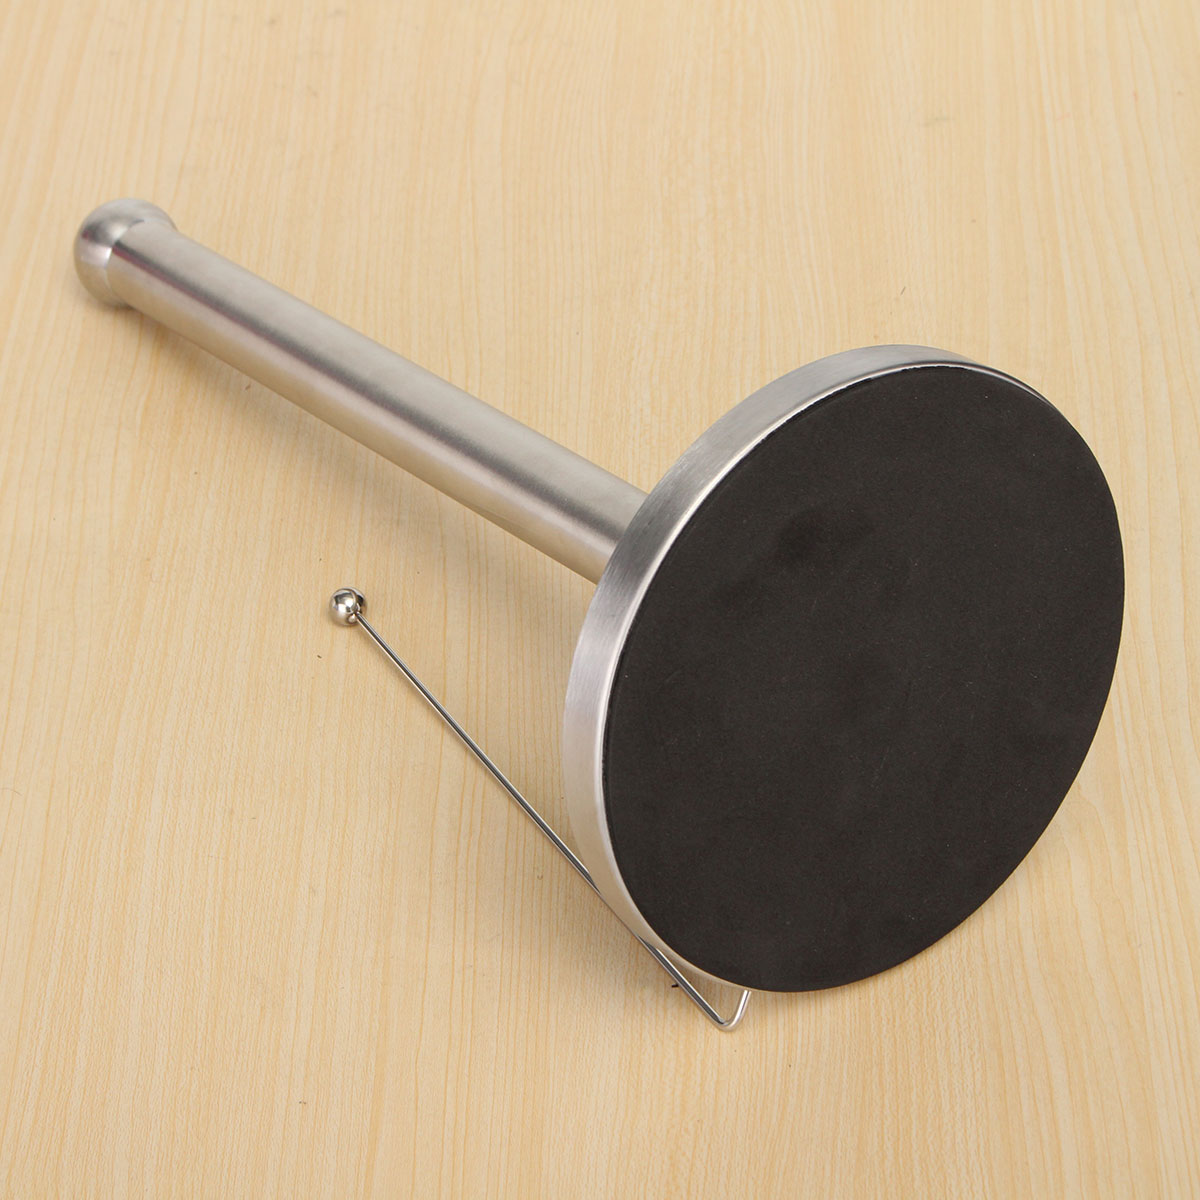 Free-Standing-Paper-Towel-Holder-Hook-Stainless-Steel-Kitchen-Roll-Suction-Base-1051418